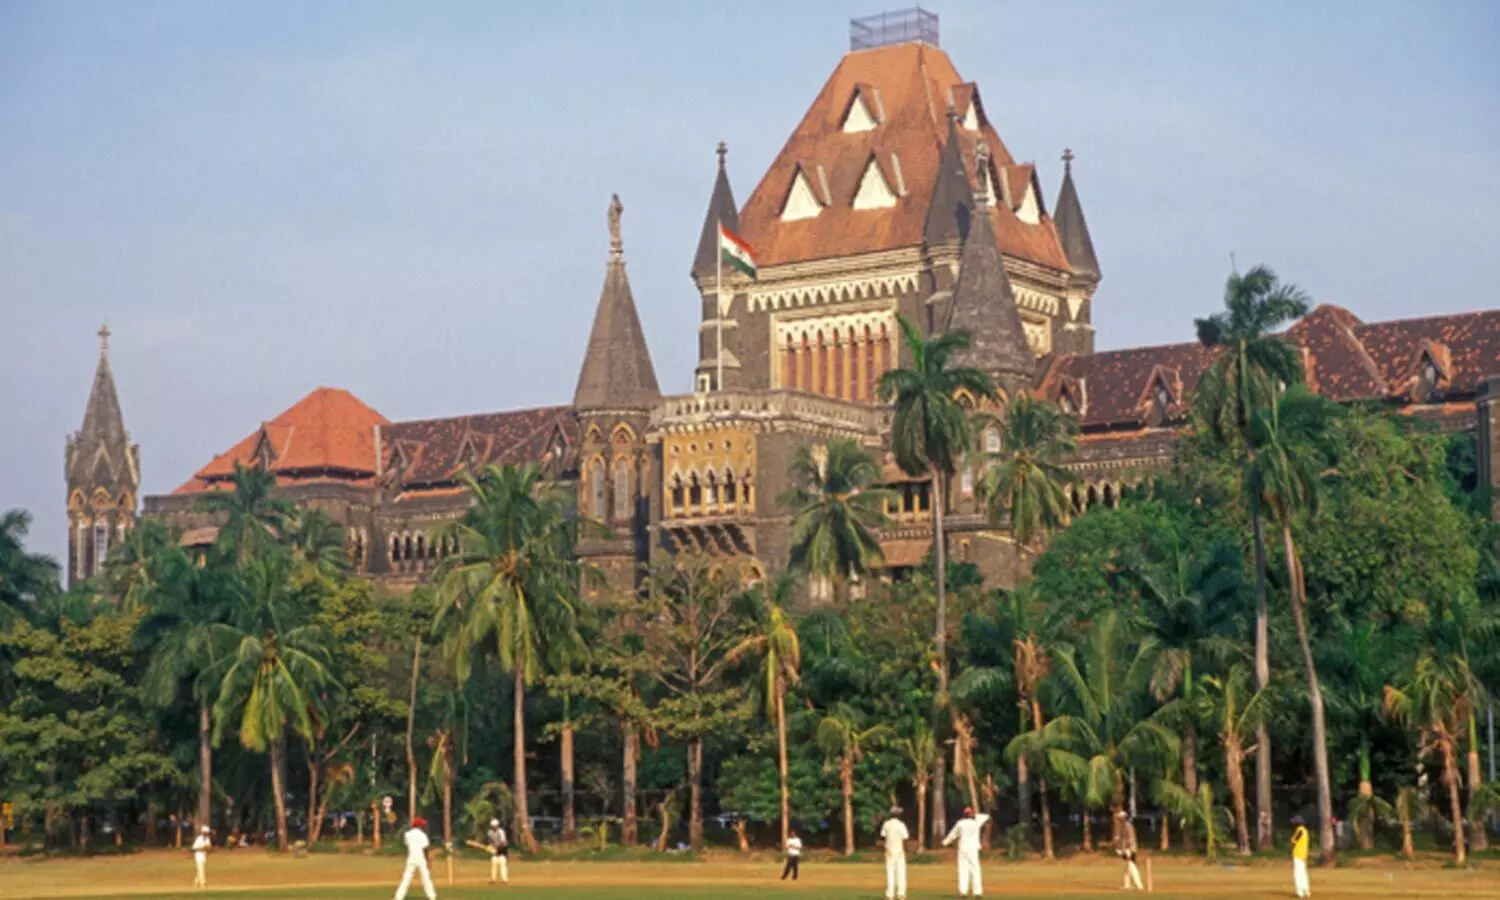 IPC 304, 304A invoked against doctor over hospital fire: IMA moves Bombay HC seeking to quash case